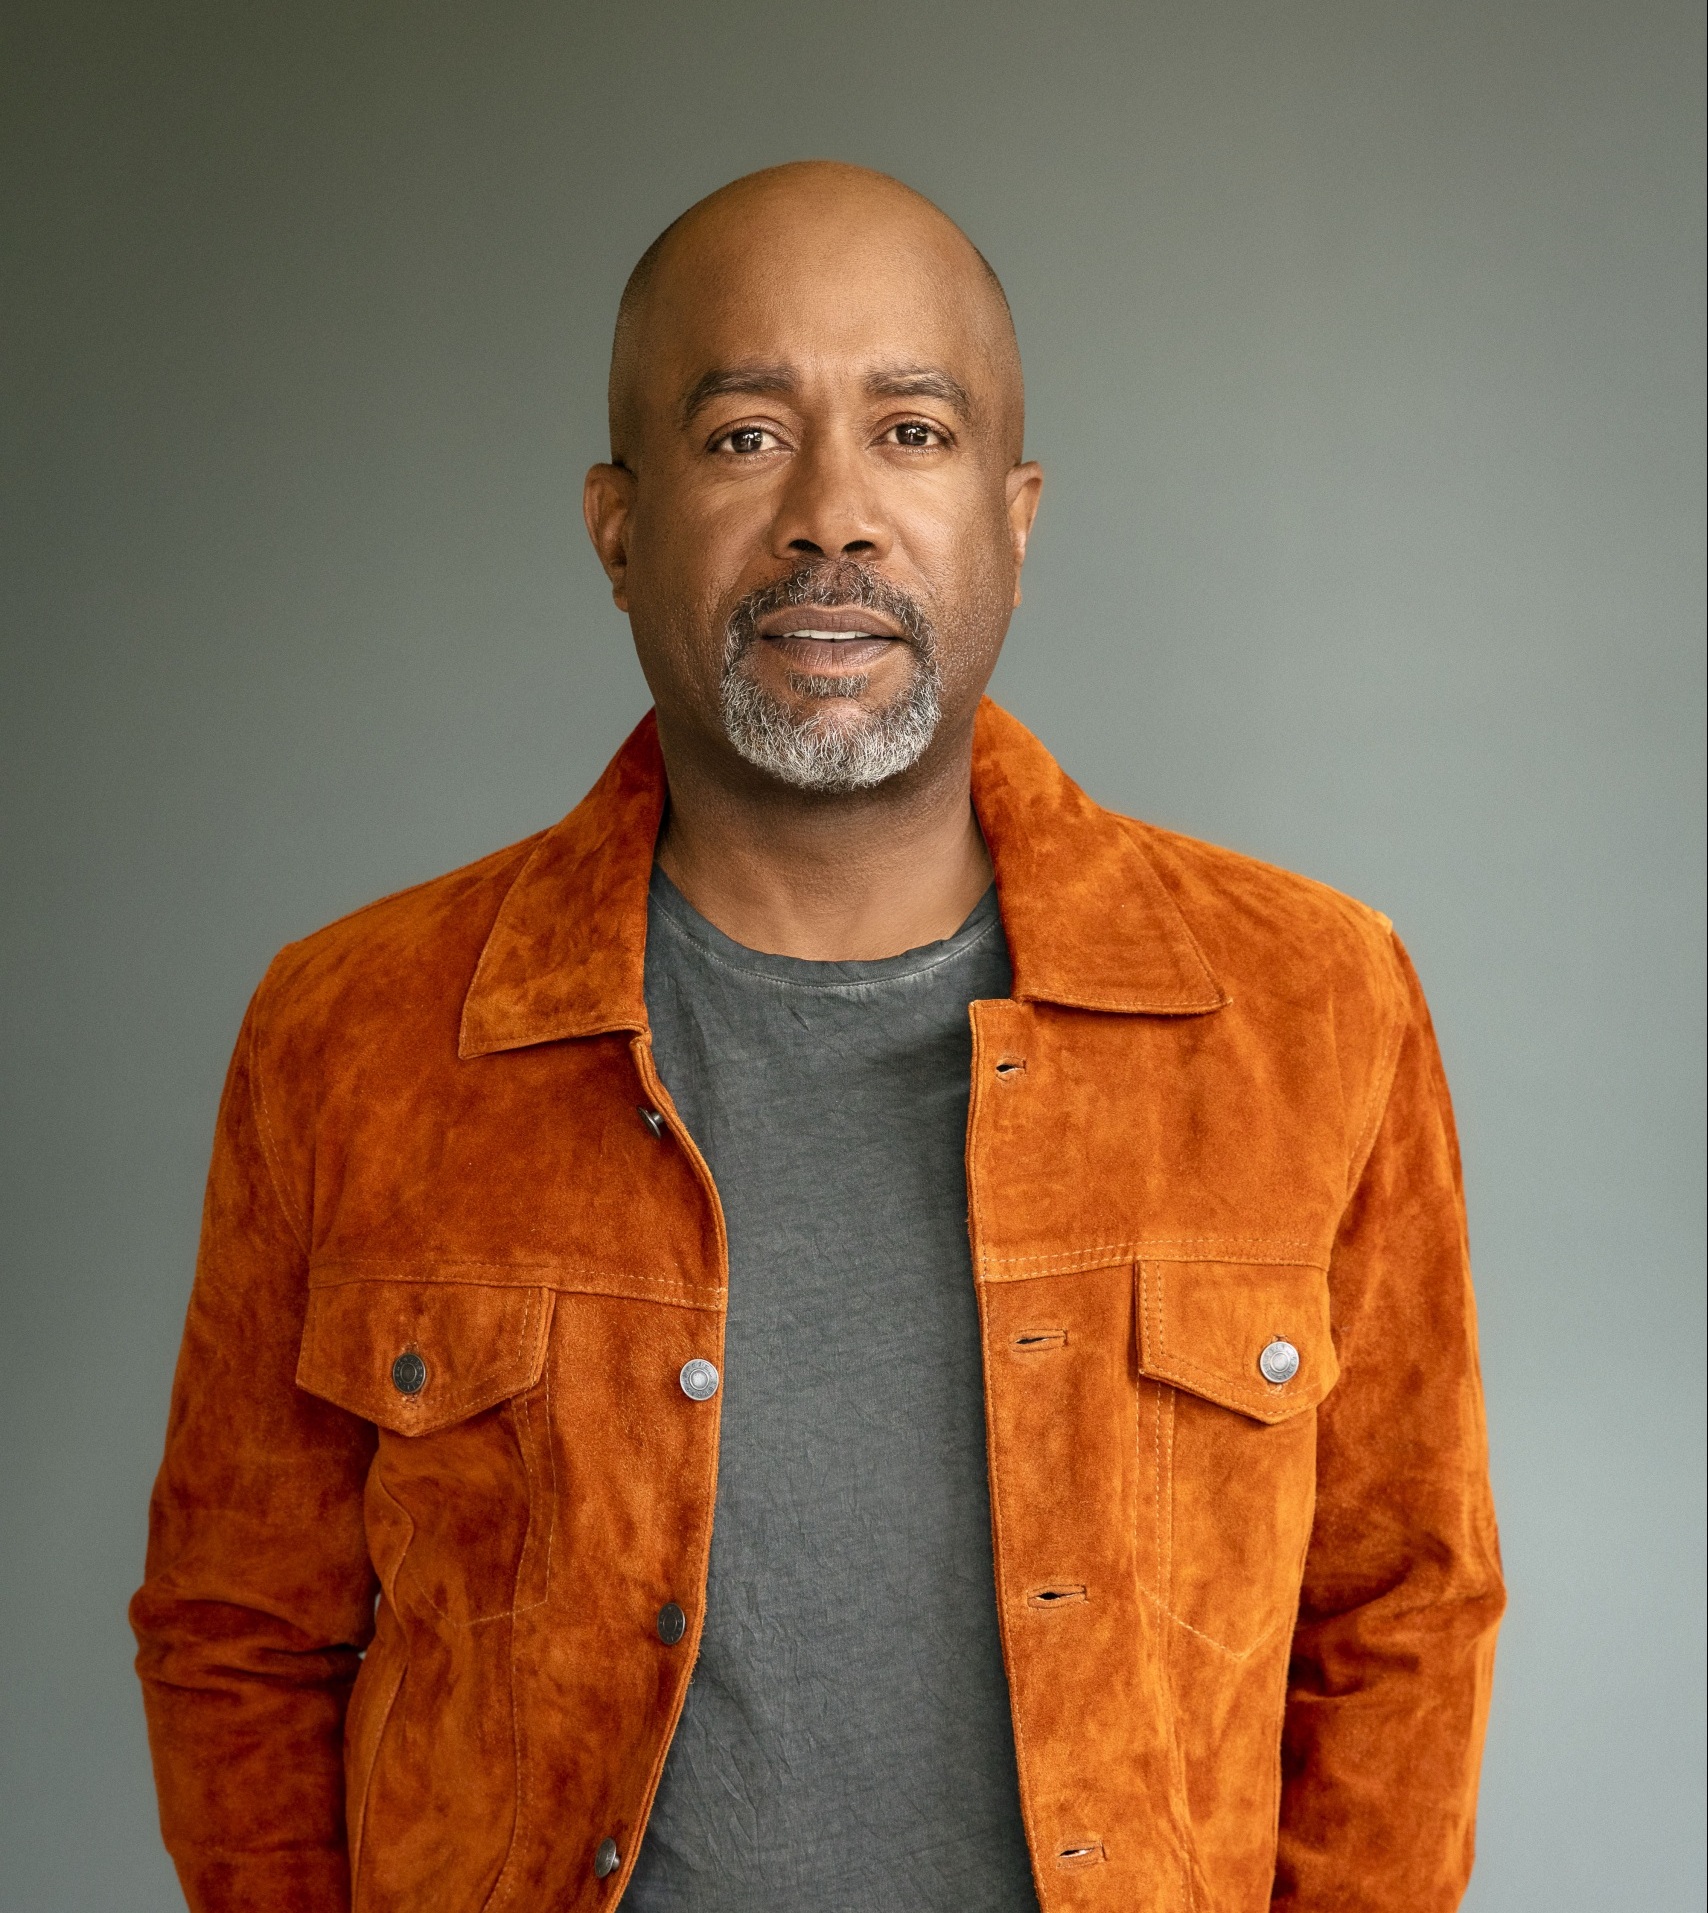 DARIUS RUCKER PAYS TRIBUTE TO HIS “BIGGEST SUPPORTER” WITH HIS UPCOMING ALBUM.